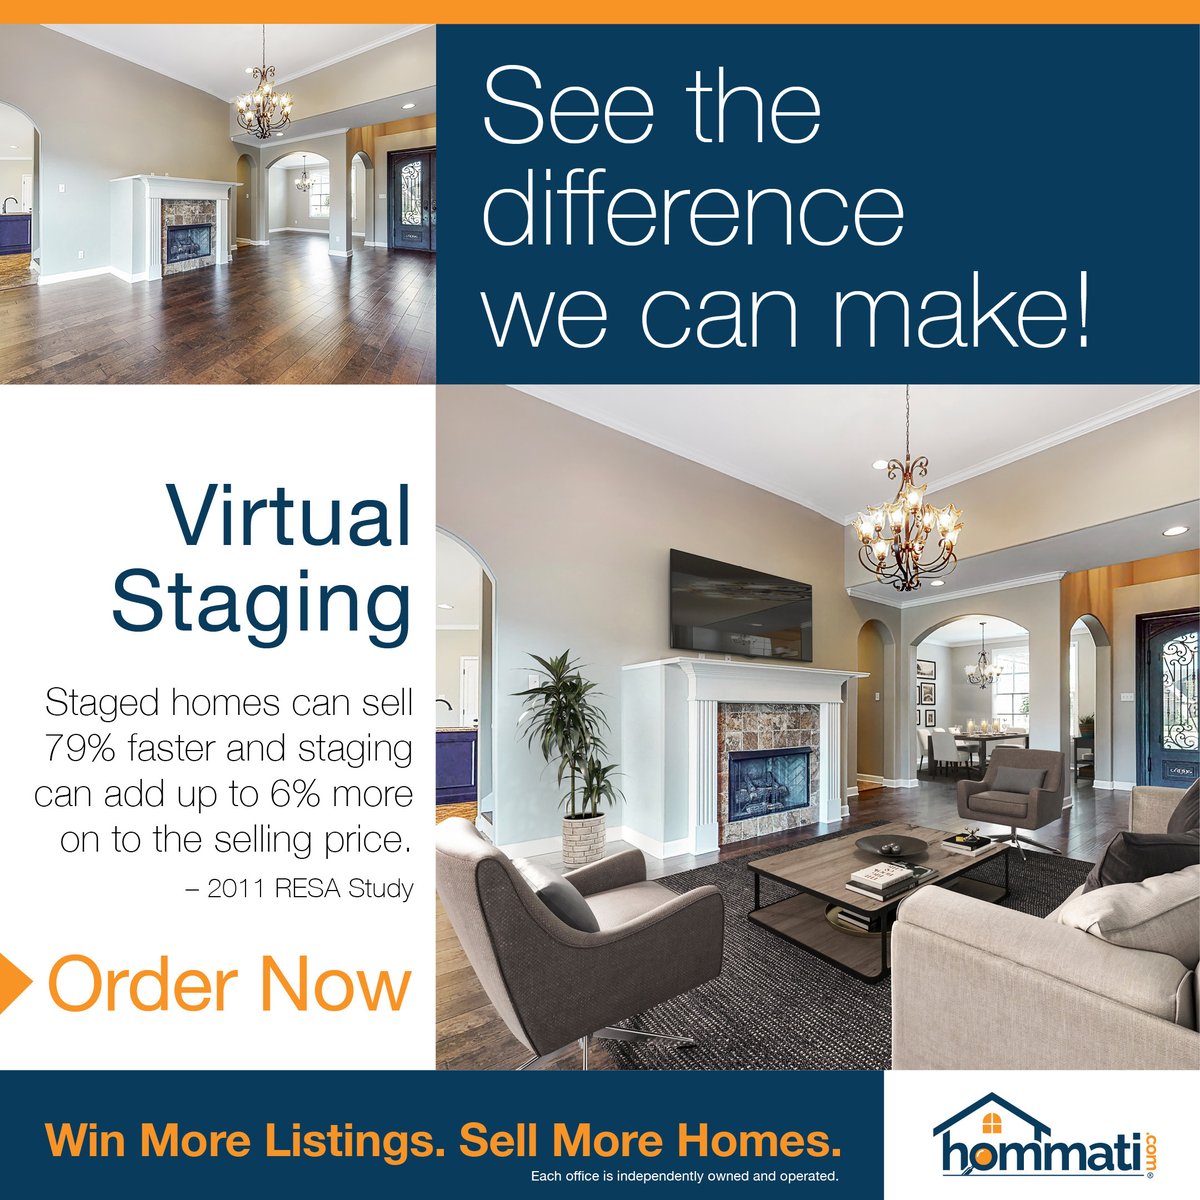 👉👉 Virtual home staging is affordable, effective, and convenient. What more could you ask for? Make your empty listings stand out with Hommati!

💻 hommati.com/office/223
📞 (214) 624-9886
📧 vise@hommati.com

#Hommati #RealEstateService #RealtorMarketing...